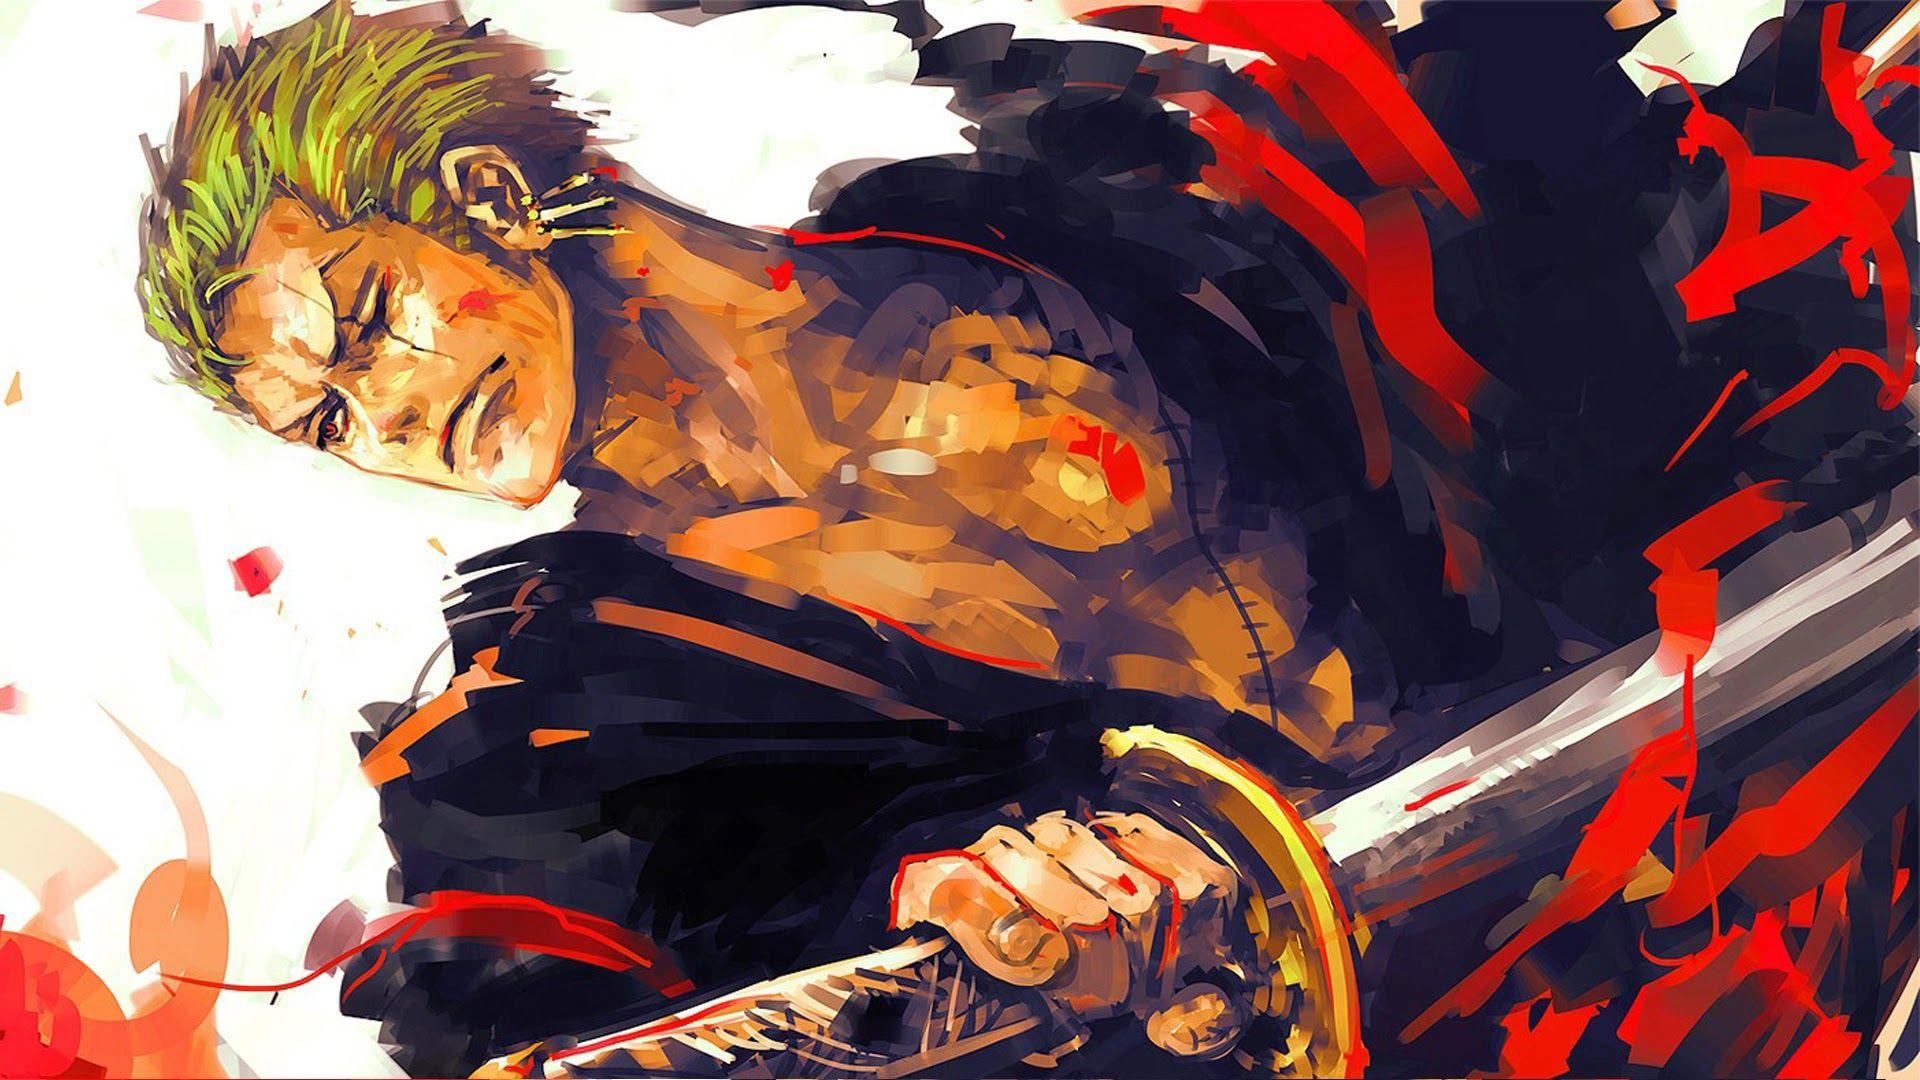 Roronoa Zoro Wallpaper HD 4K APK for Android Download